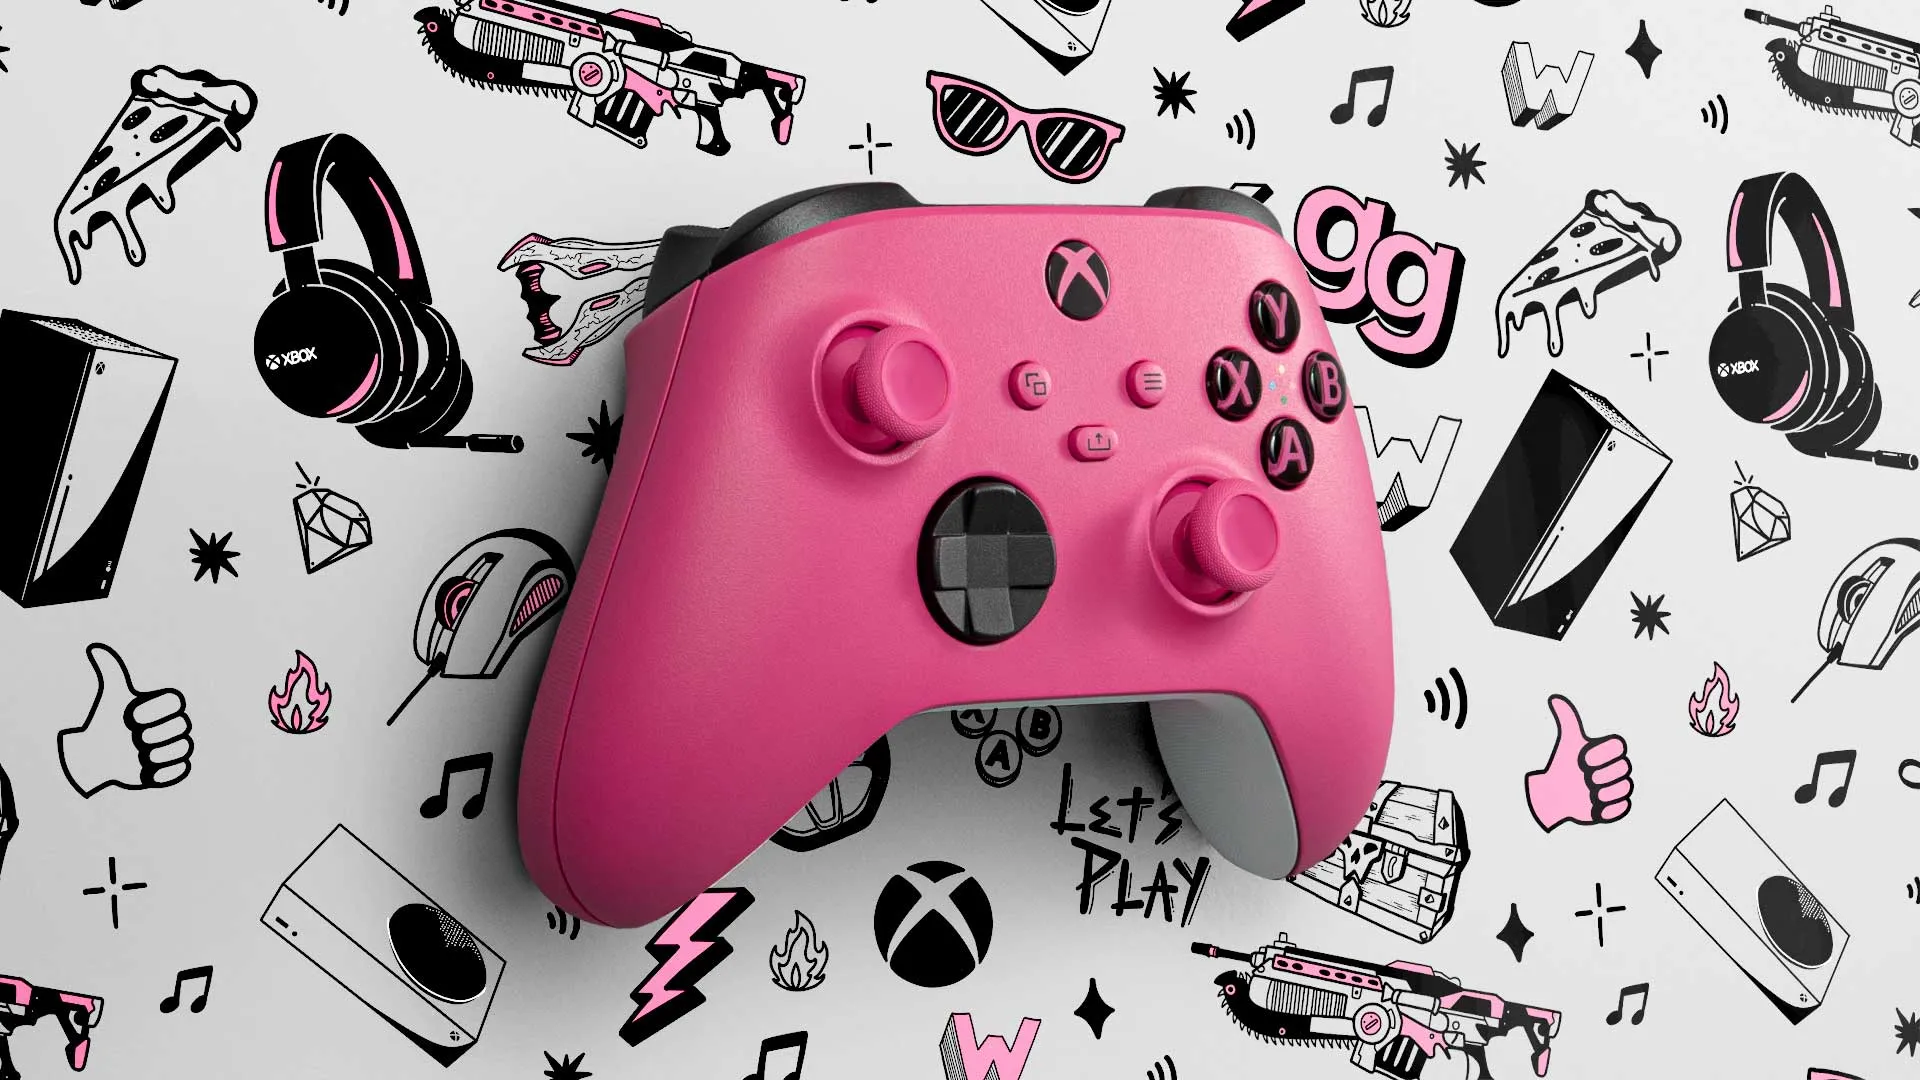 Deep Pink Xbox Wireless Controller introduced just in time for Mother's Day